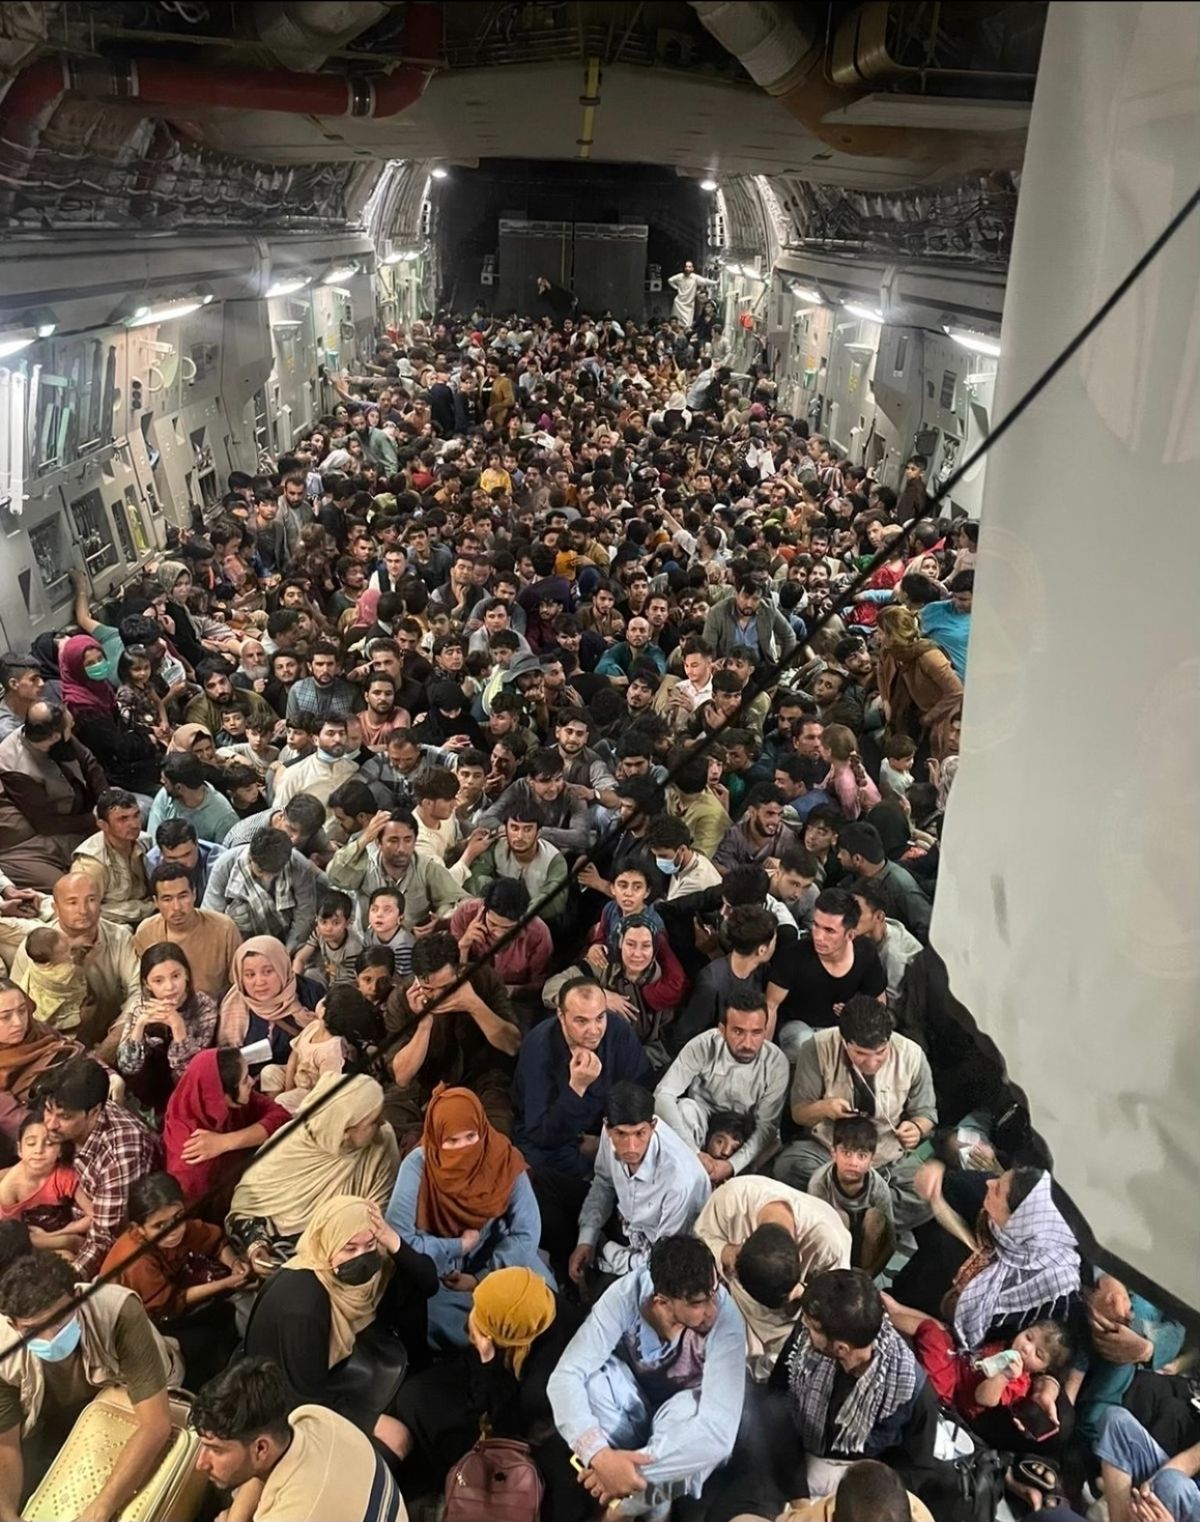 A U.S. Air Force C-17 Globemaster III transported about 640 Afghan citizens from Kabul to Qatar on Aug. 15. (Photo: U.S. Air Force courtesy photo)